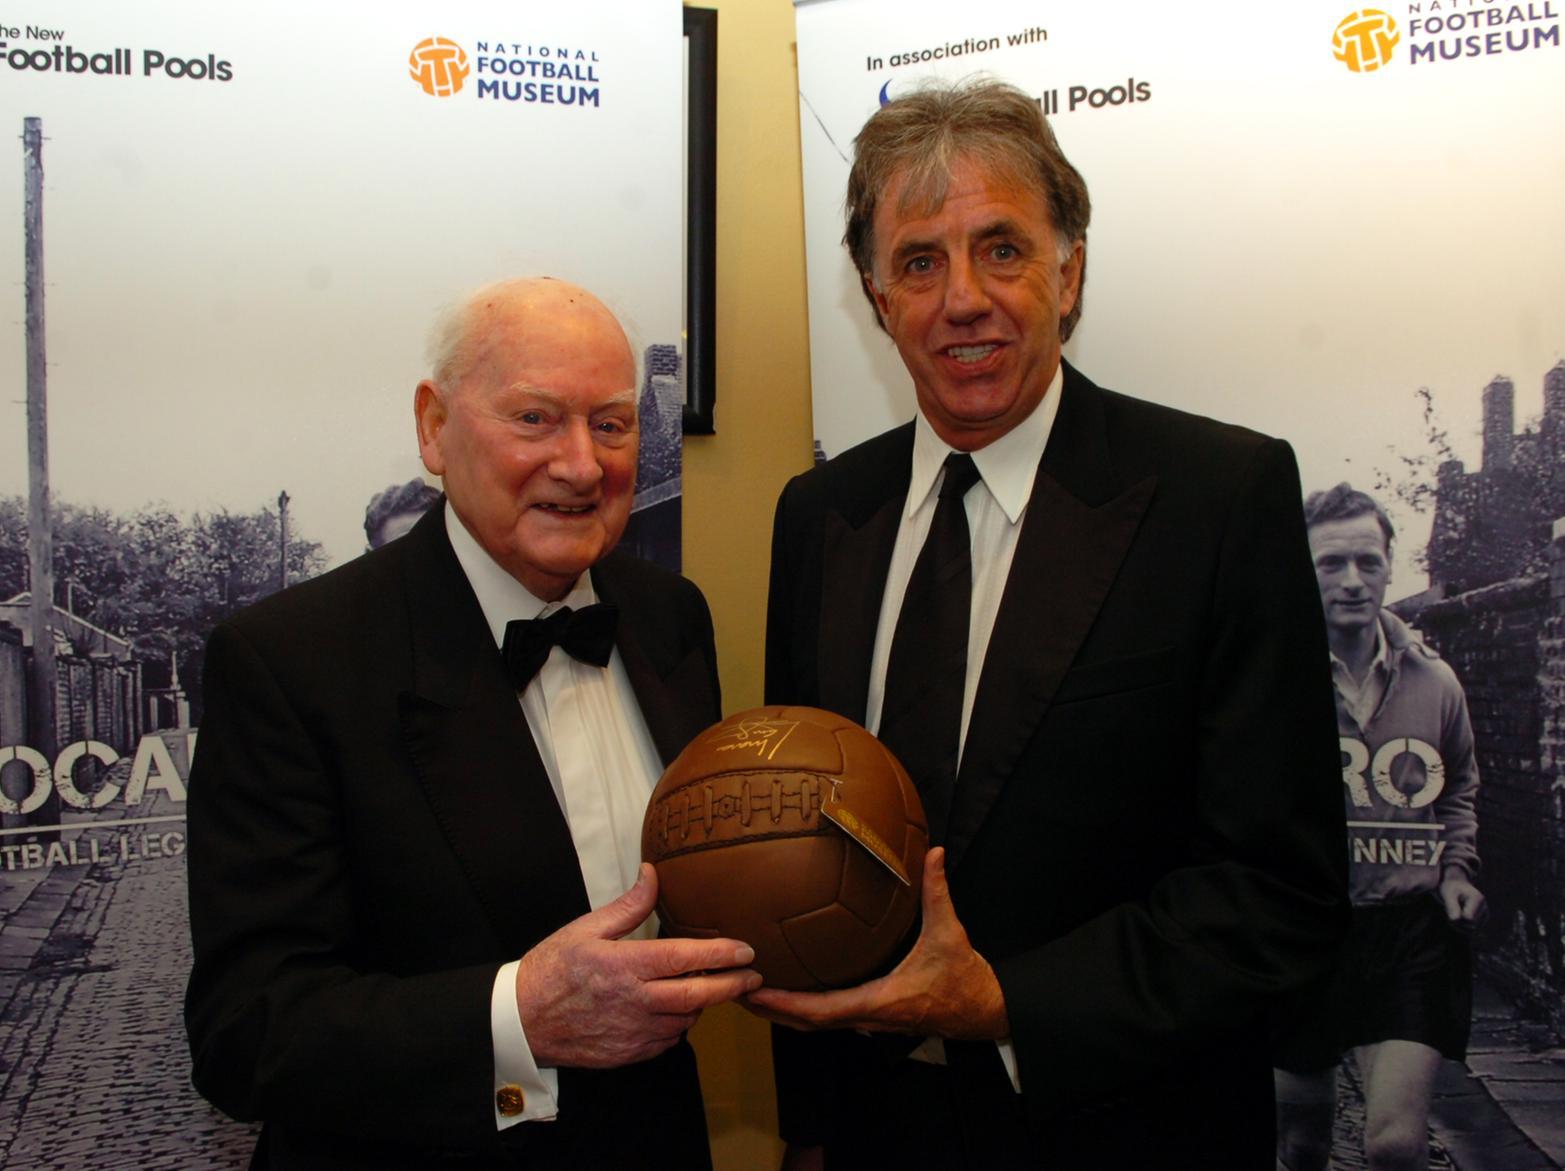 Sir Tom Finney with Mark Lawrenson at the Football Museum when it was housed at Deepdale